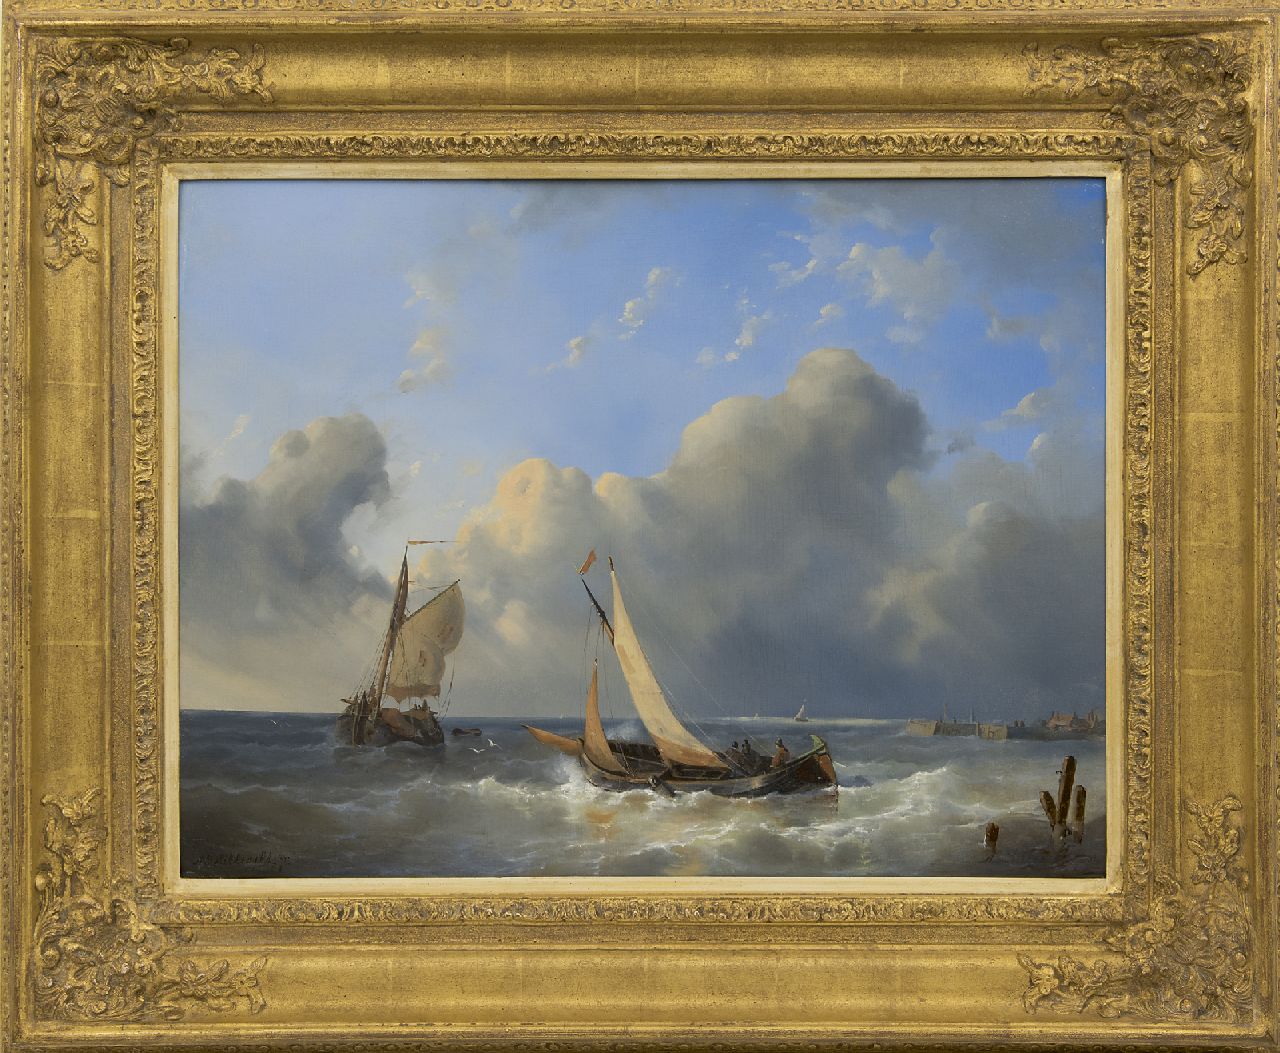 Hilleveld A.D.  | Adrianus David Hilleveld, Sailing vessels near the harbour entrance, oil on panel 42.5 x 56.5 cm, signed l.l. and l.r. and dated '54